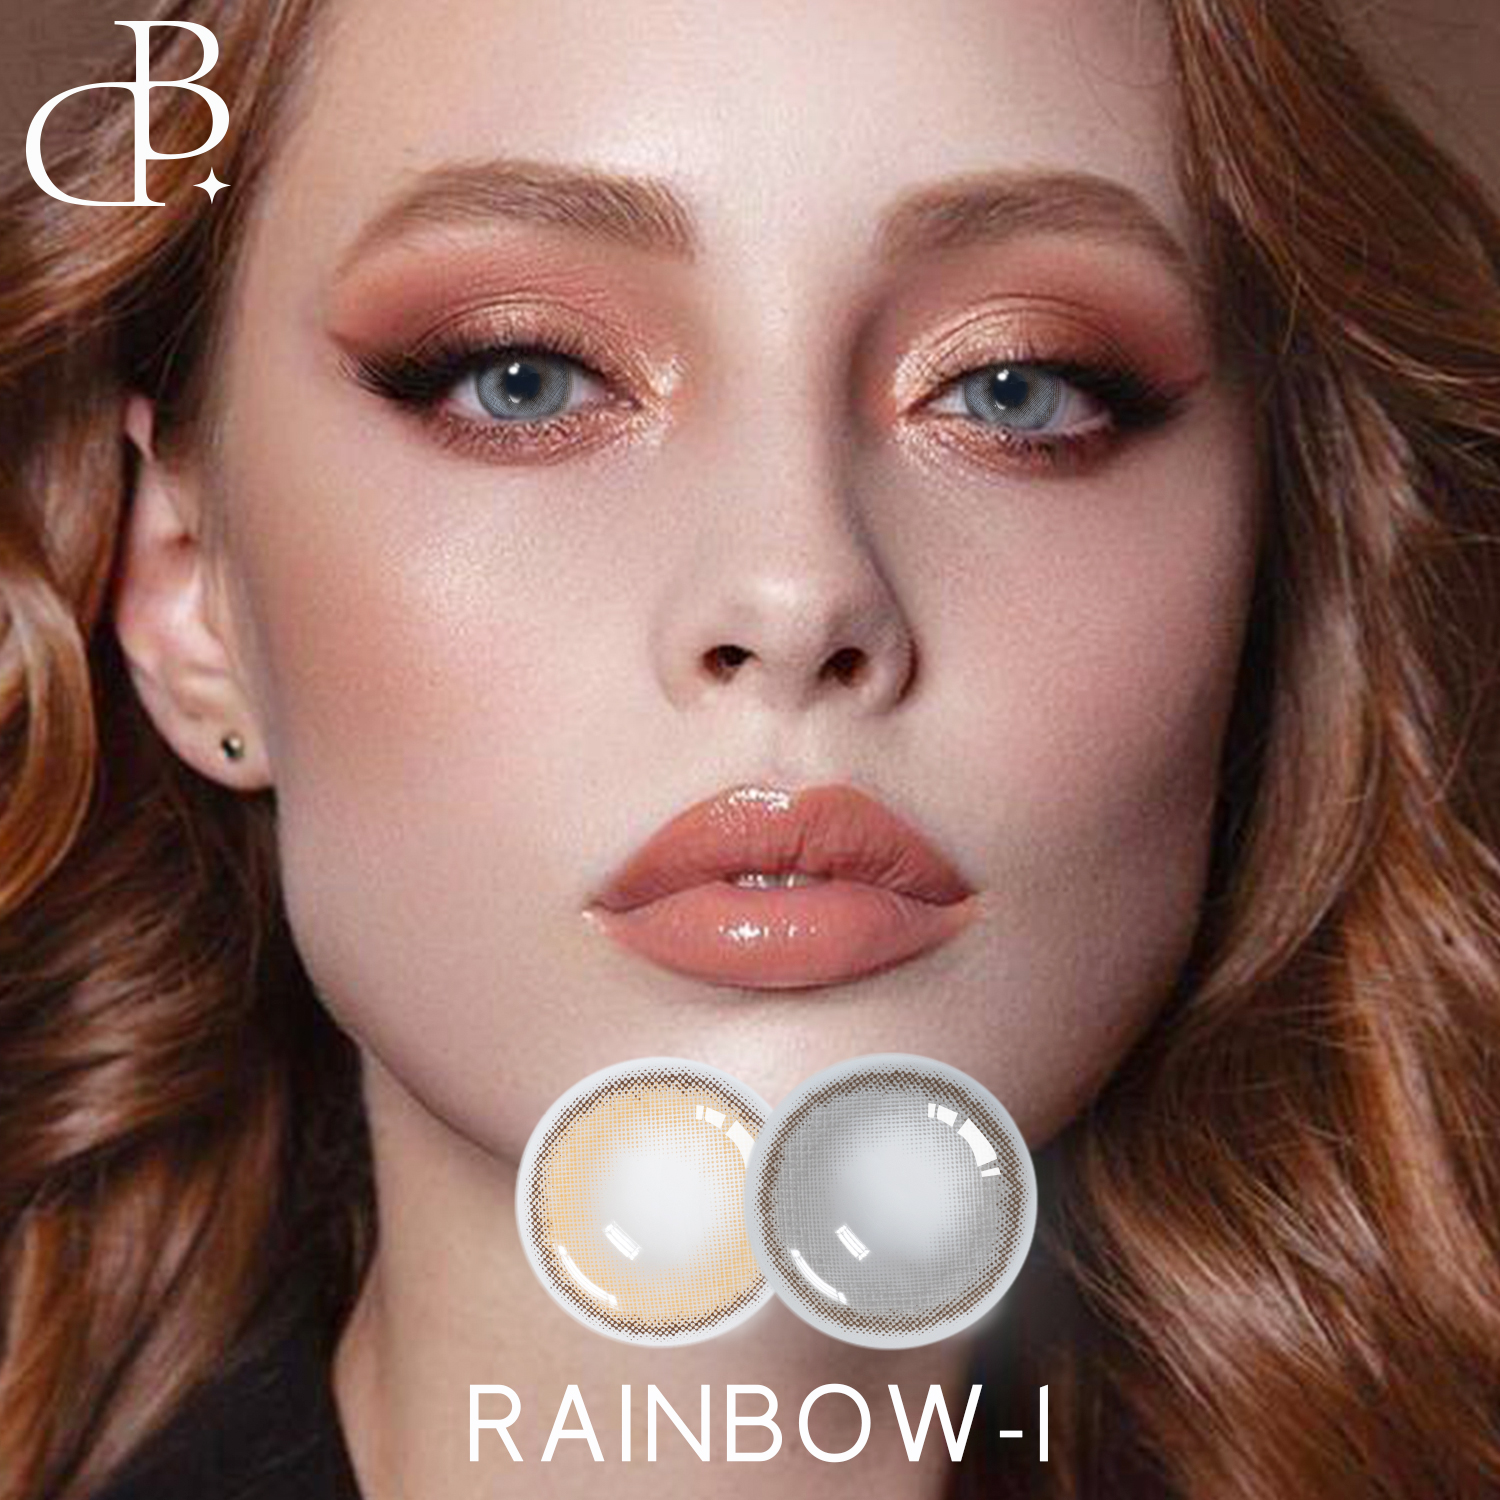 RAINBOW 14.0mm cheap price Soft Contact Lenses Contour Grey yearly Wholesale Style comfortable and shinny hotsale